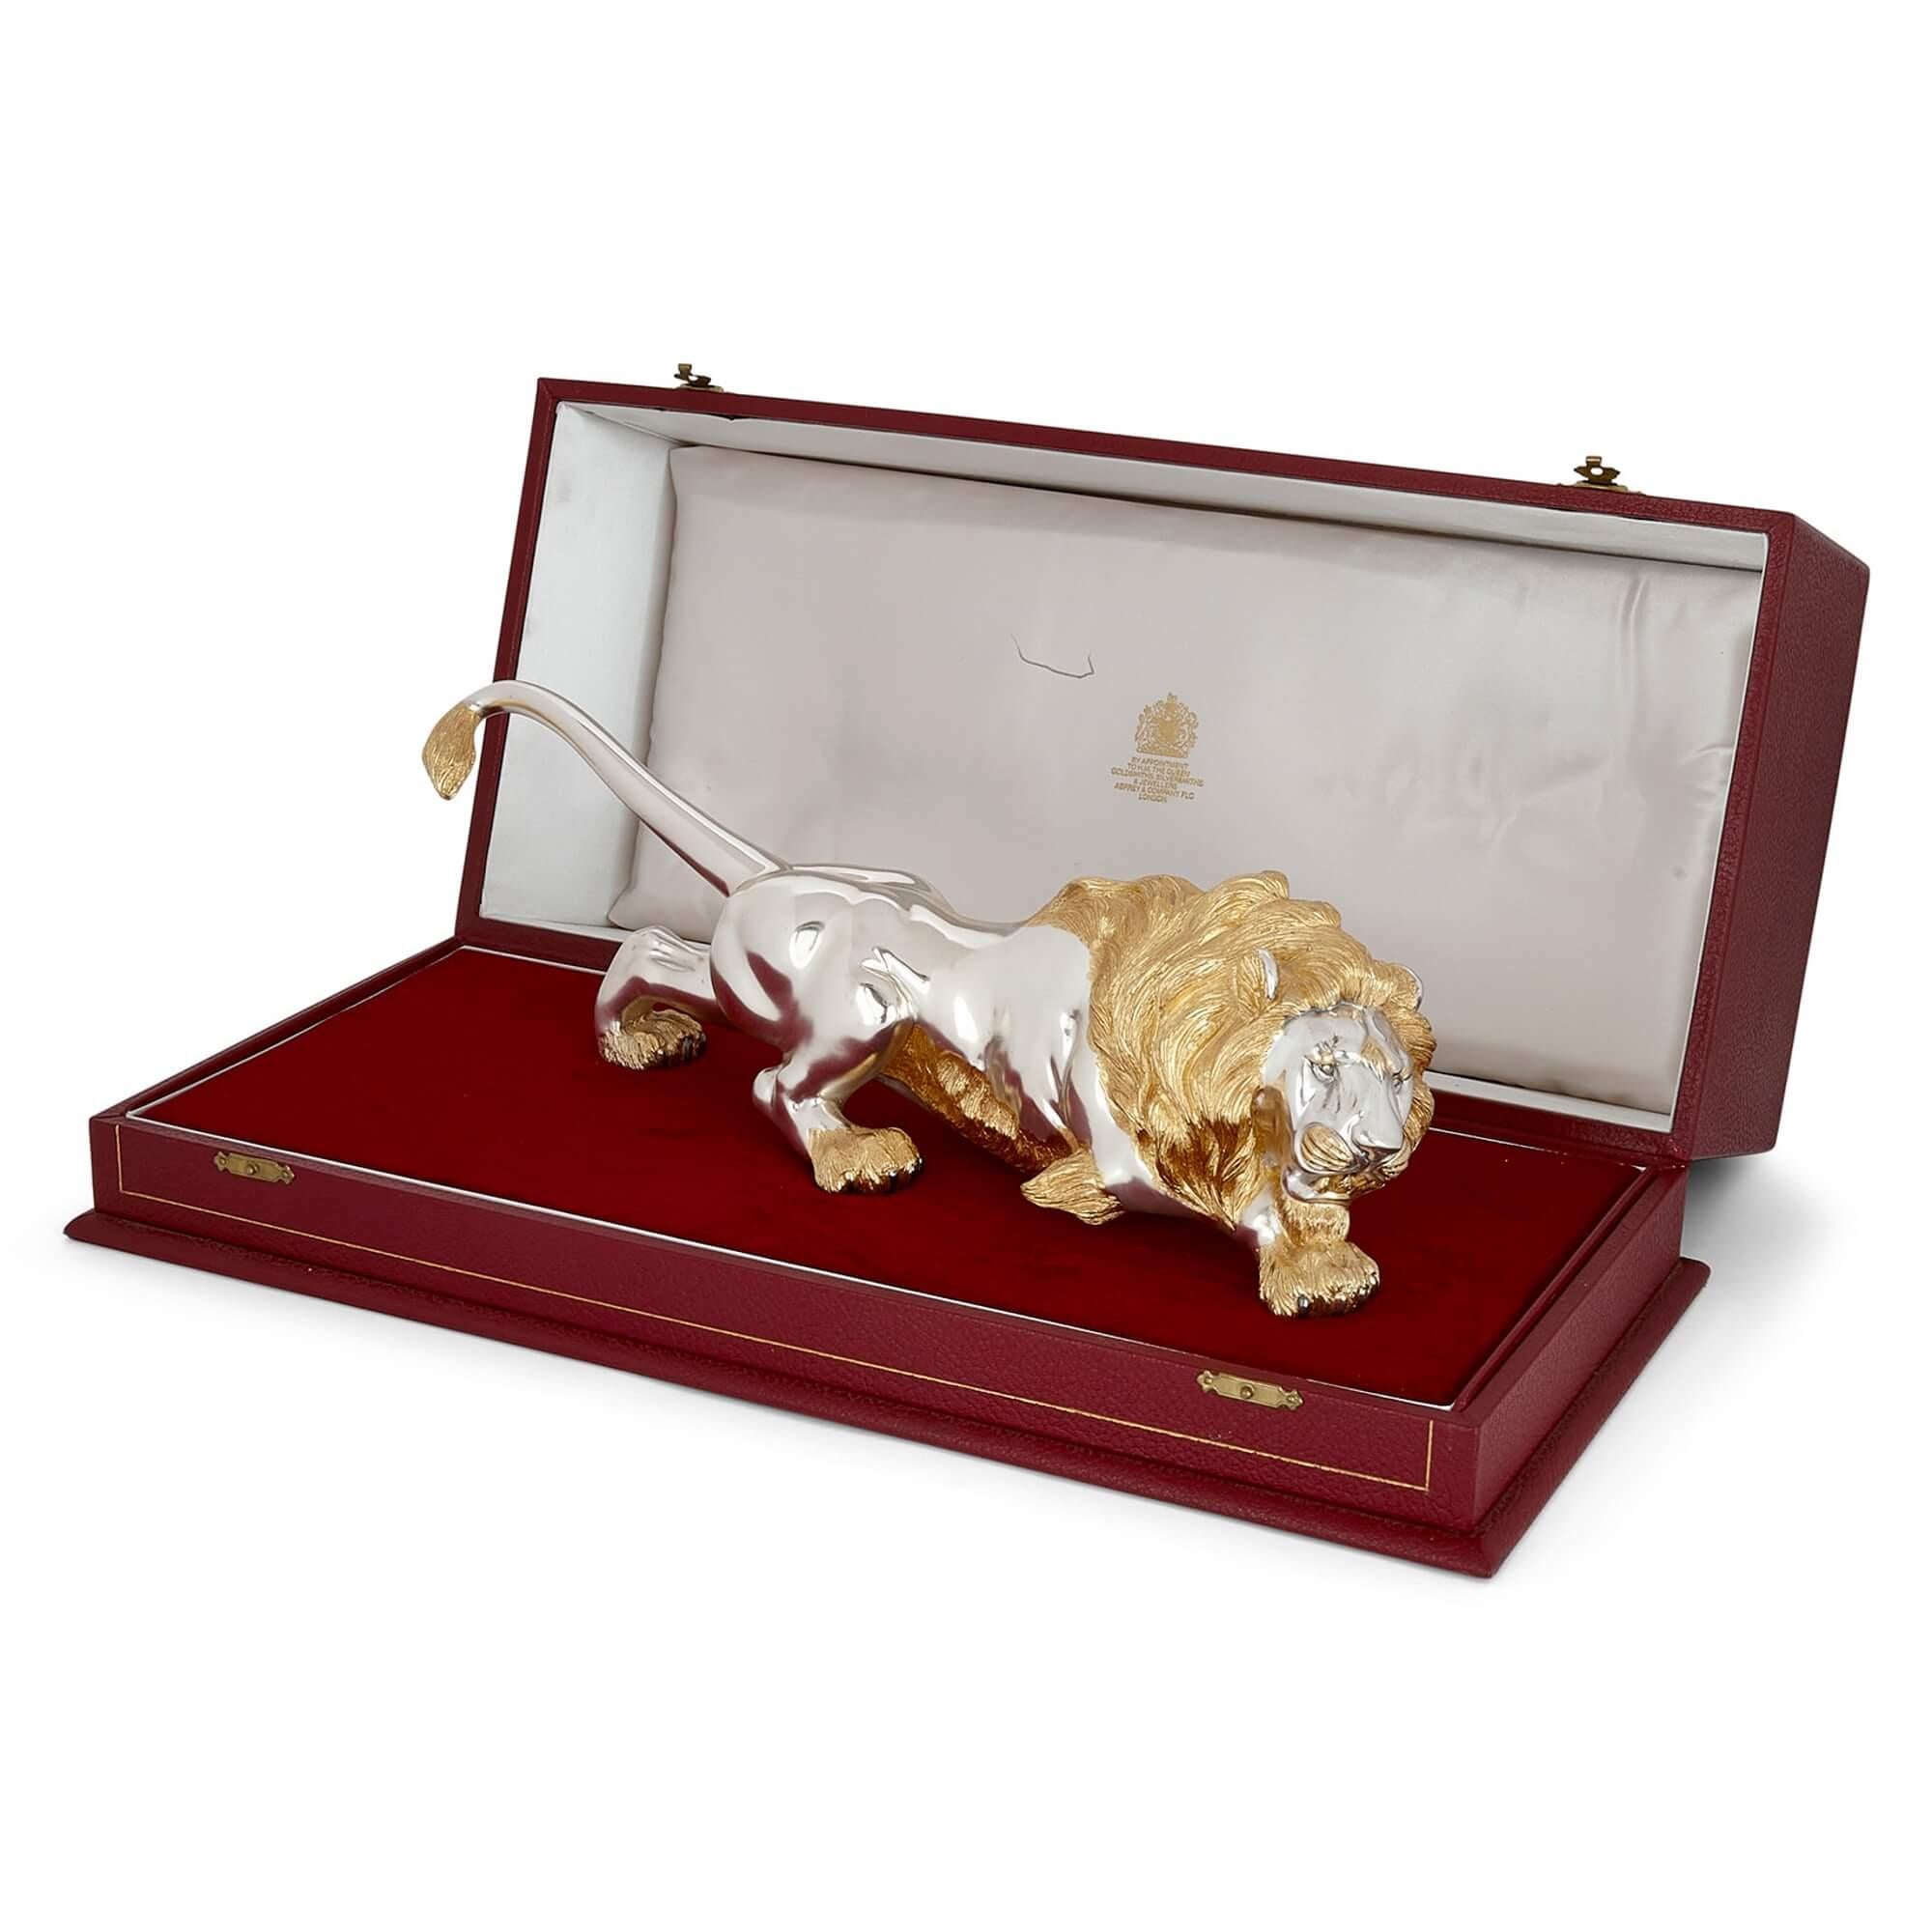 Large silver, vermeil and diamond model of a lion by Asprey
English, c. 1980
Lion: Height 12cm, width 38cm, depth 13cm
Case: Height 19cm, width 49cm, depth 23cm

Superbly crafted by Asprey in around 1980, the model depicts a majestic lion.